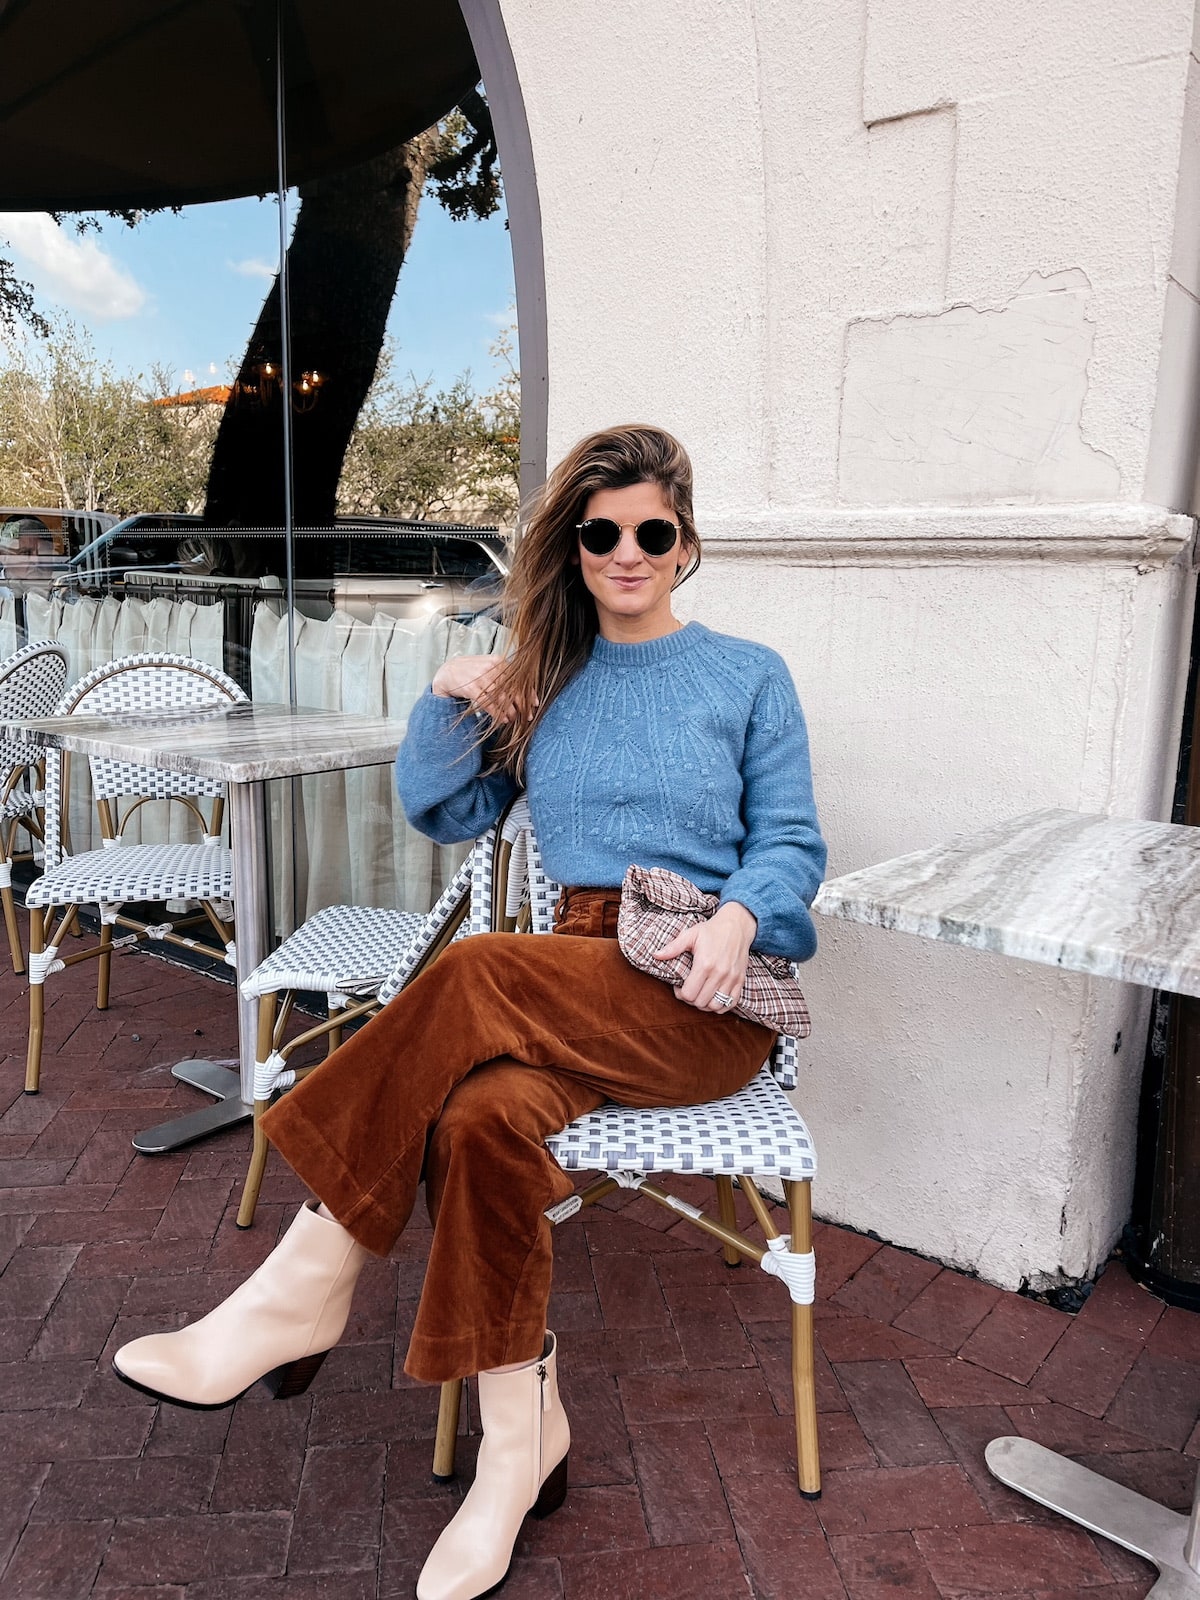 Brighton Butler wearing Boden corduroy pants with blue sweater